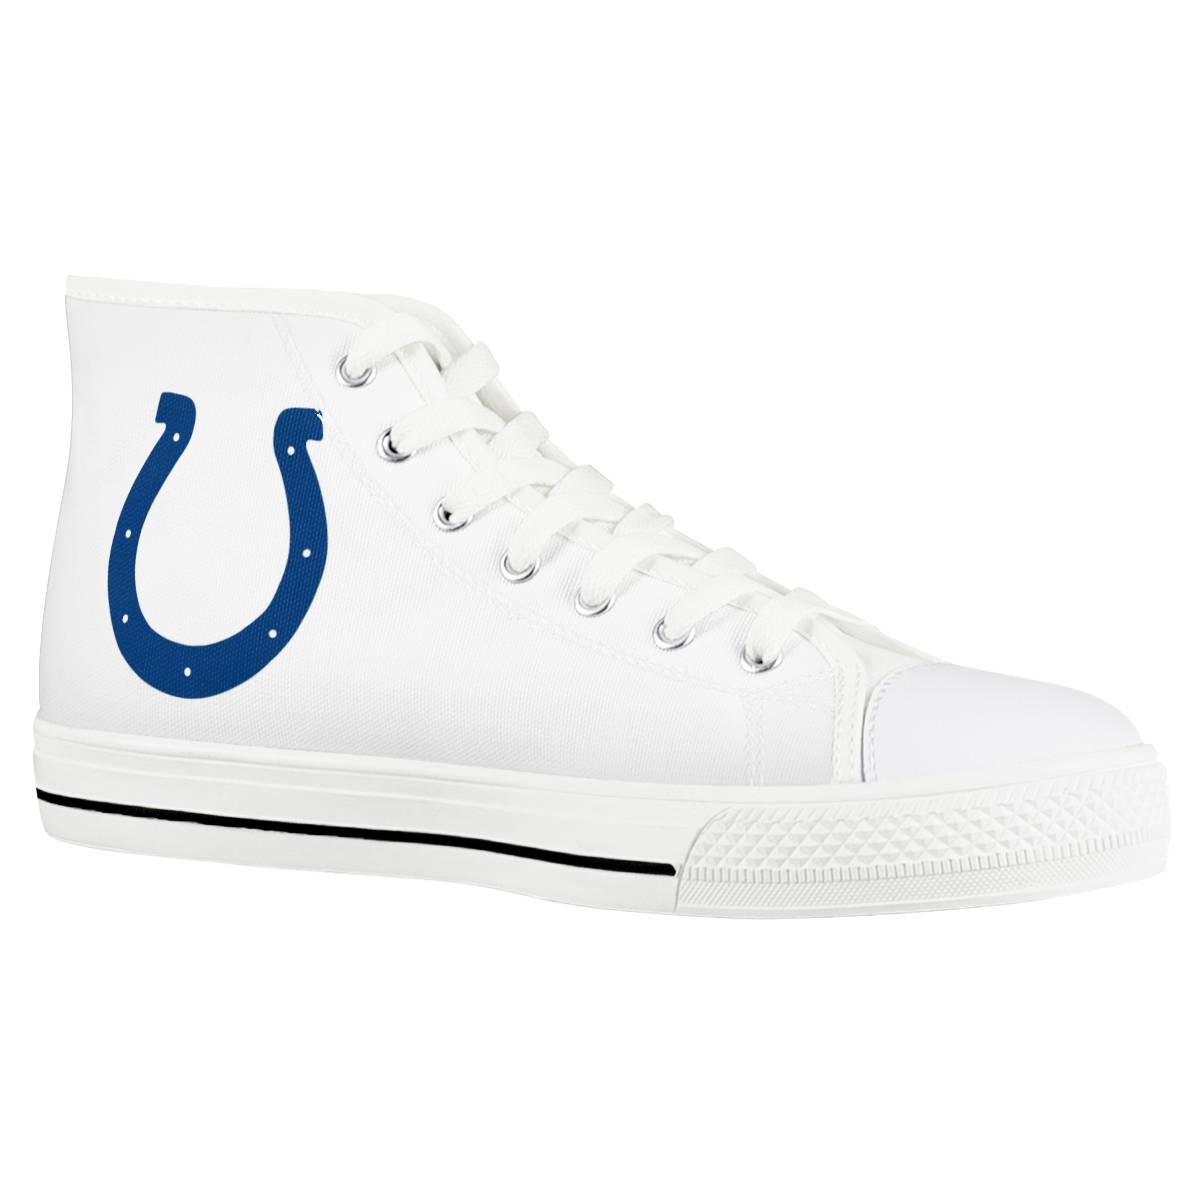 Men's Indianapolis Colts High Top Canvas Sneakers 001